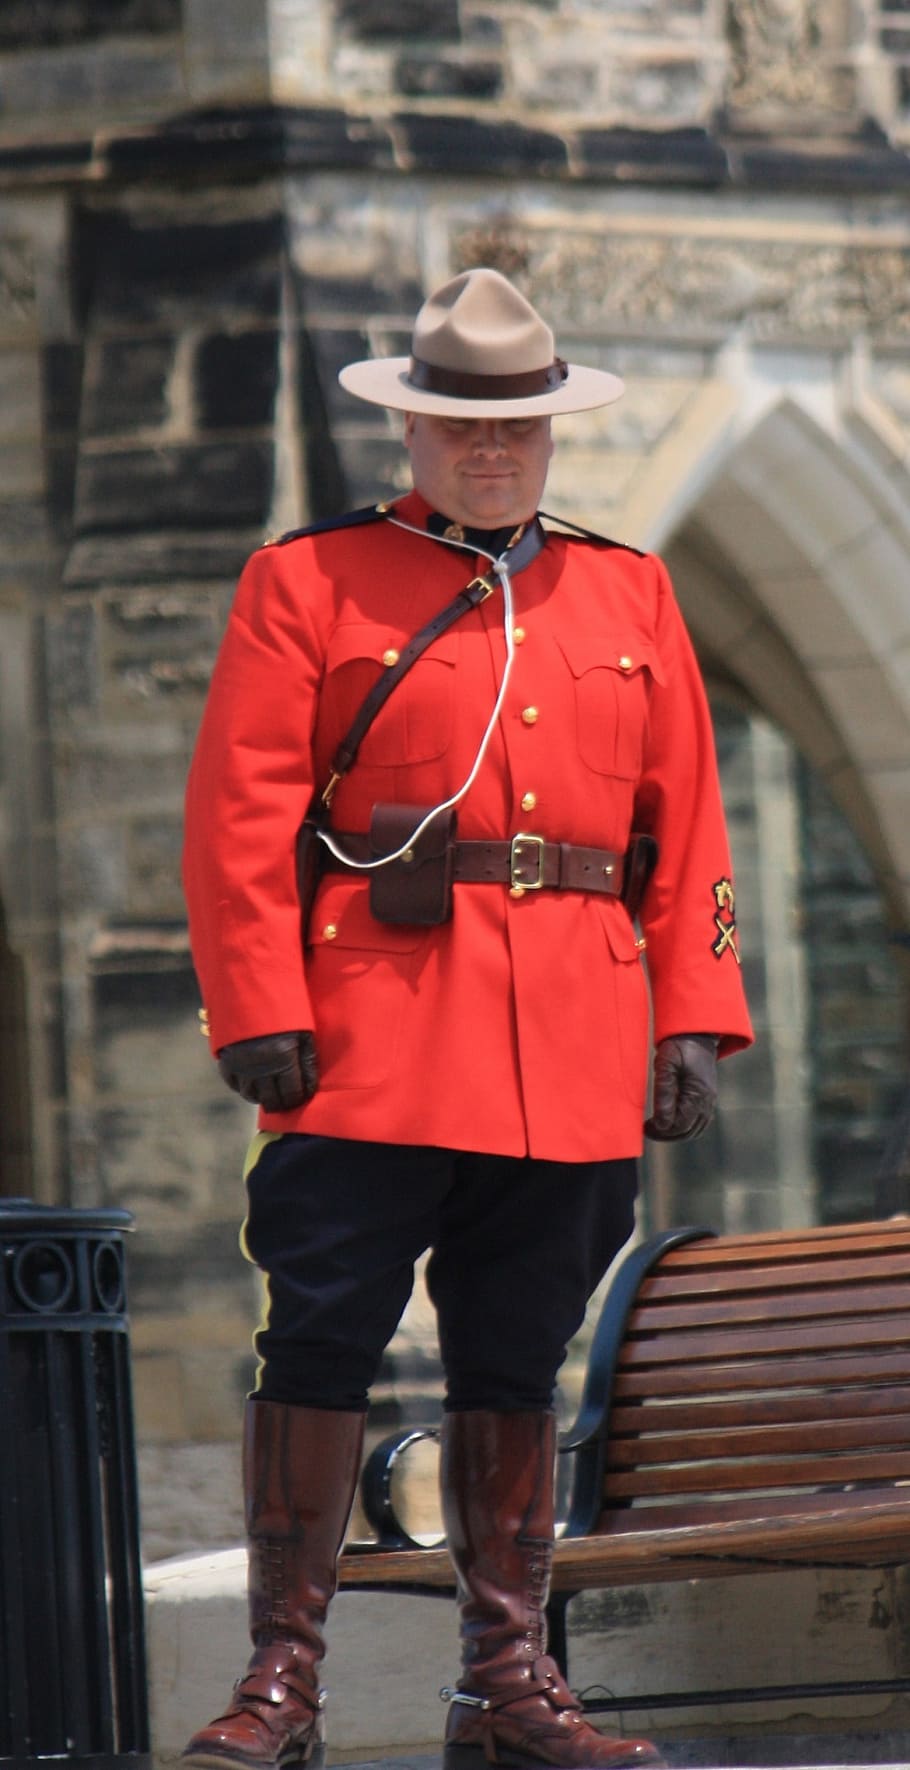 mountie, officer, royal canadian mounted police, guard, uniform